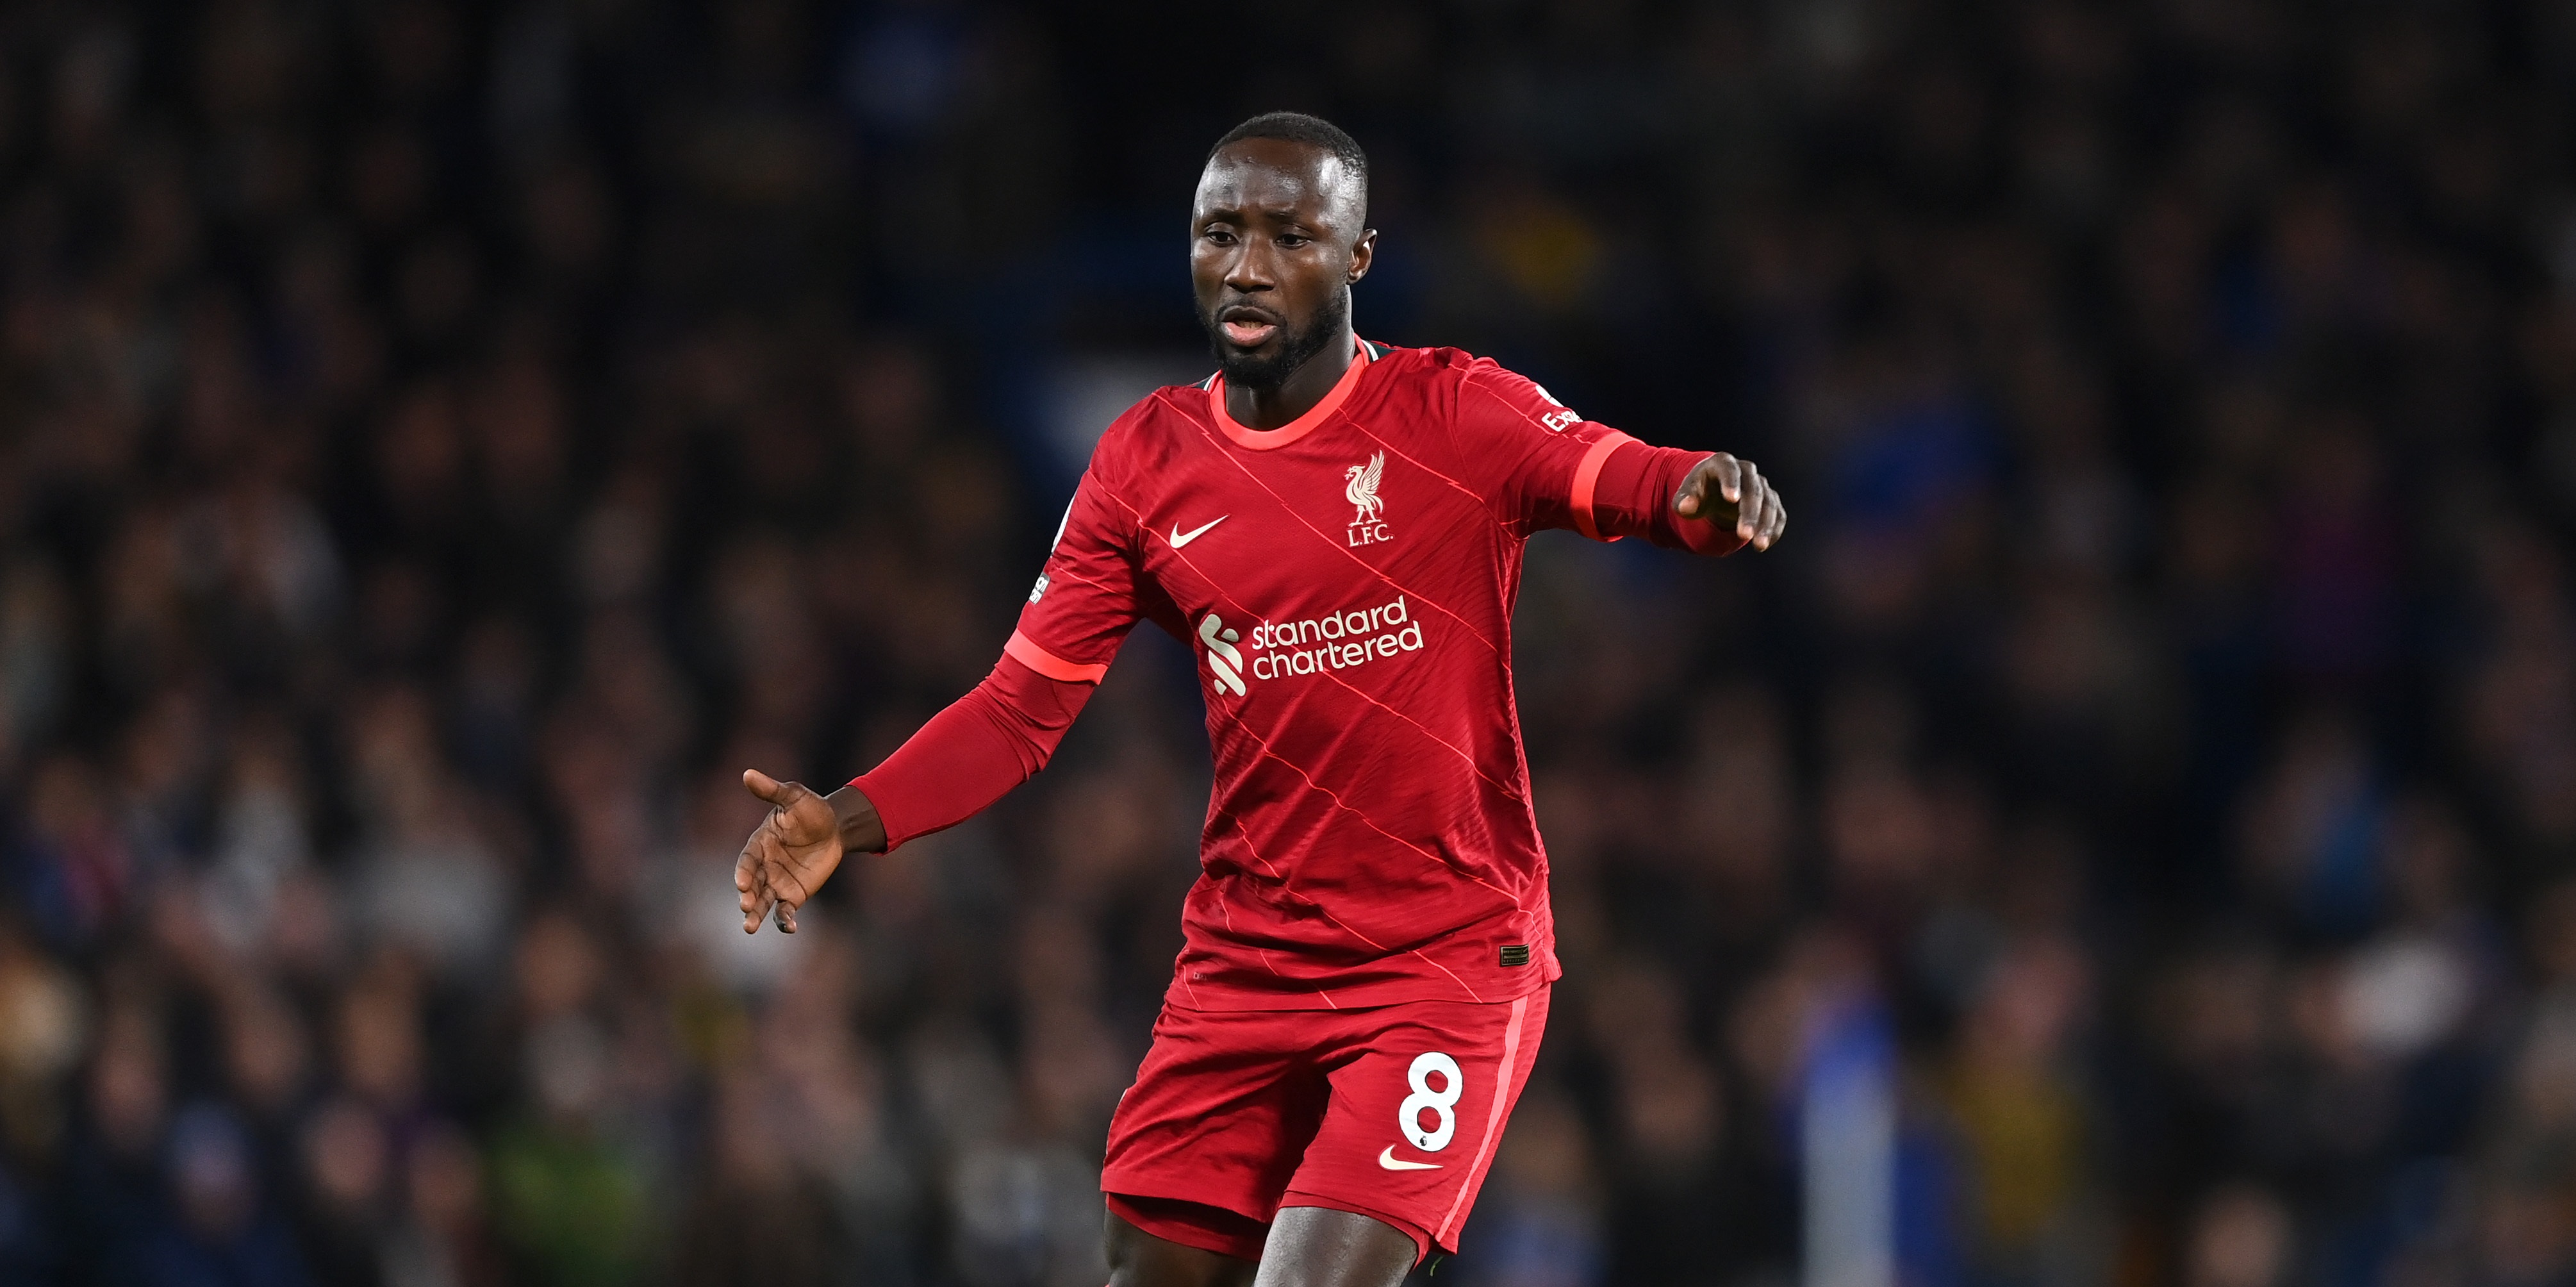 Pundit says Liverpool have an ‘excellent’ 27-year-old midfielder they ‘can’t really afford to lose’